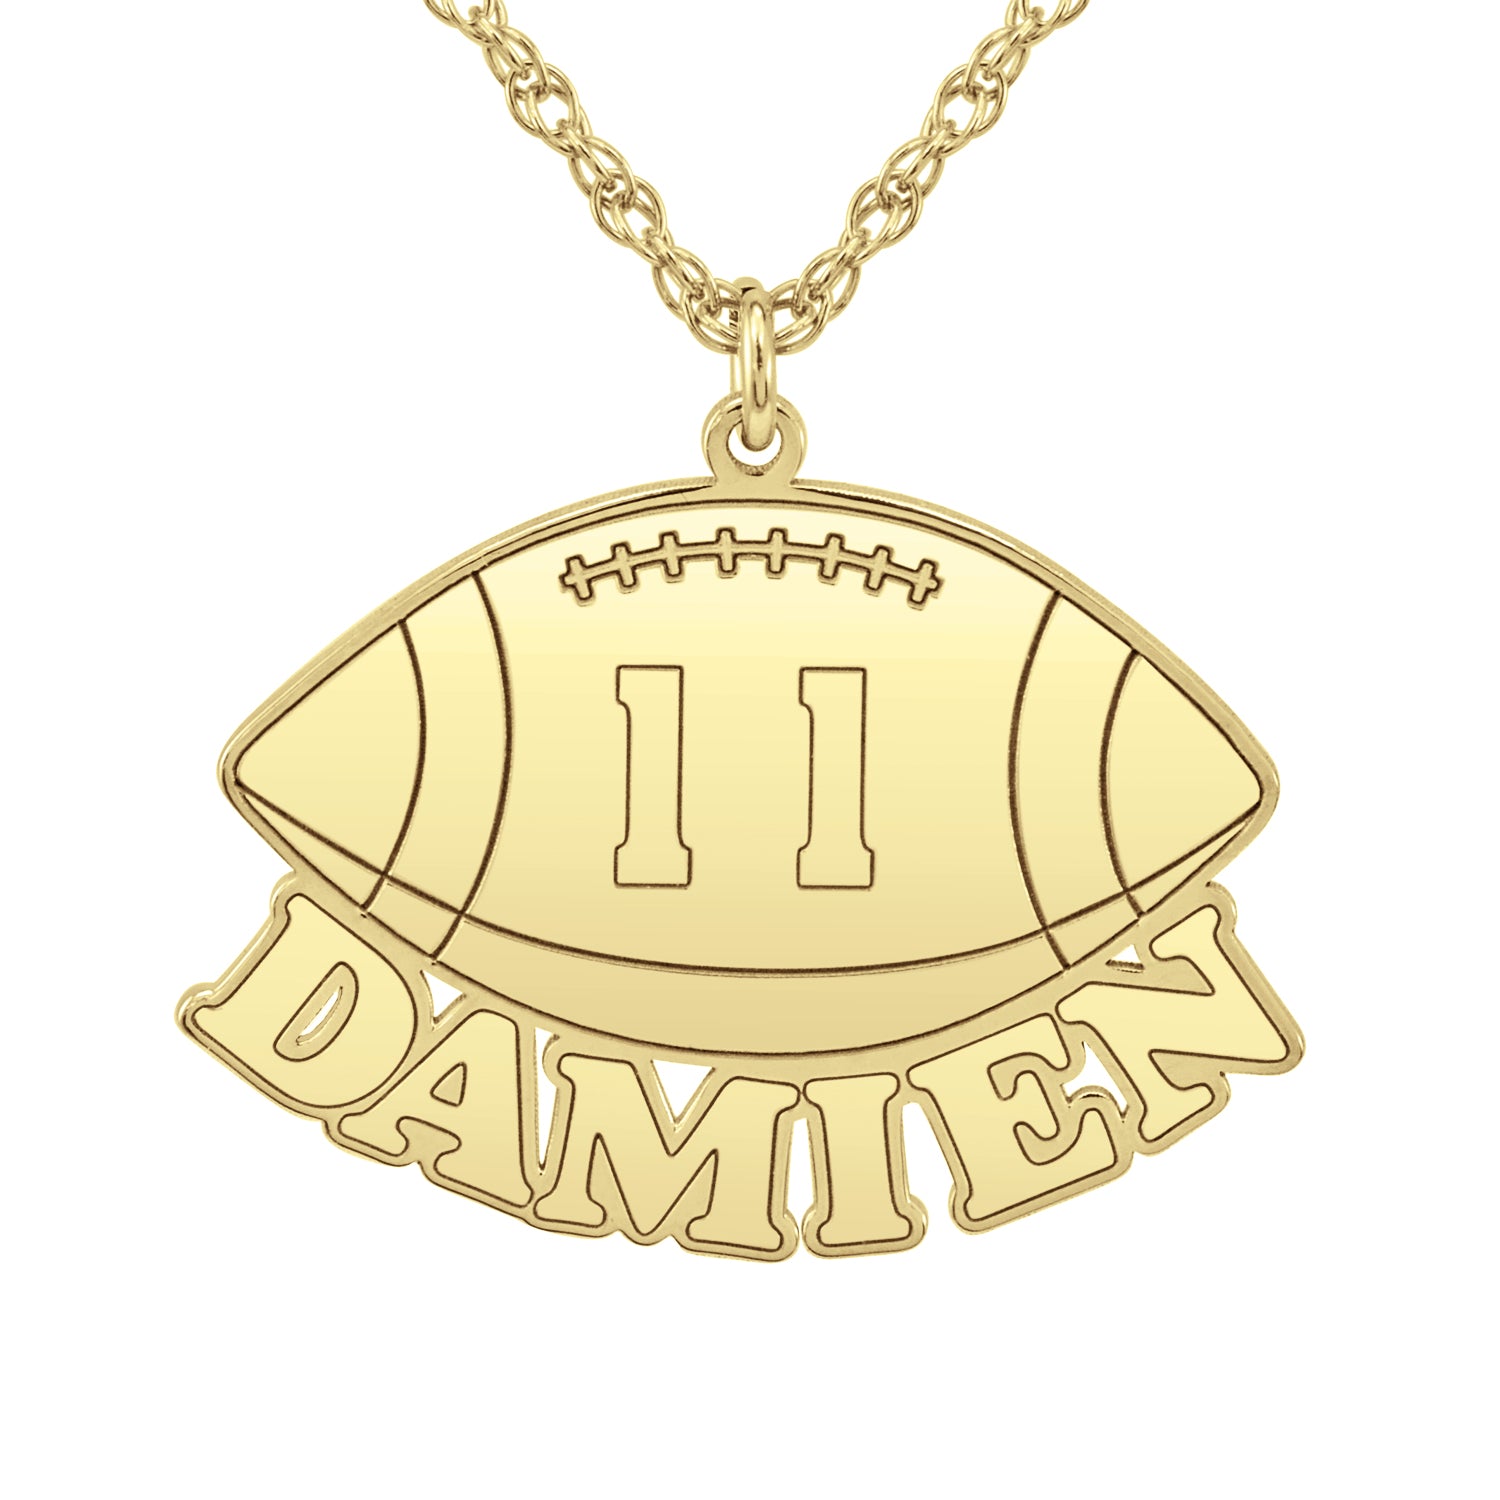 Amazon.com: Best friend necklace, football necklace, sports necklace, bff  necklace, sister, friendship jewelry, personalized necklace, initial,  monogram : Handmade Products